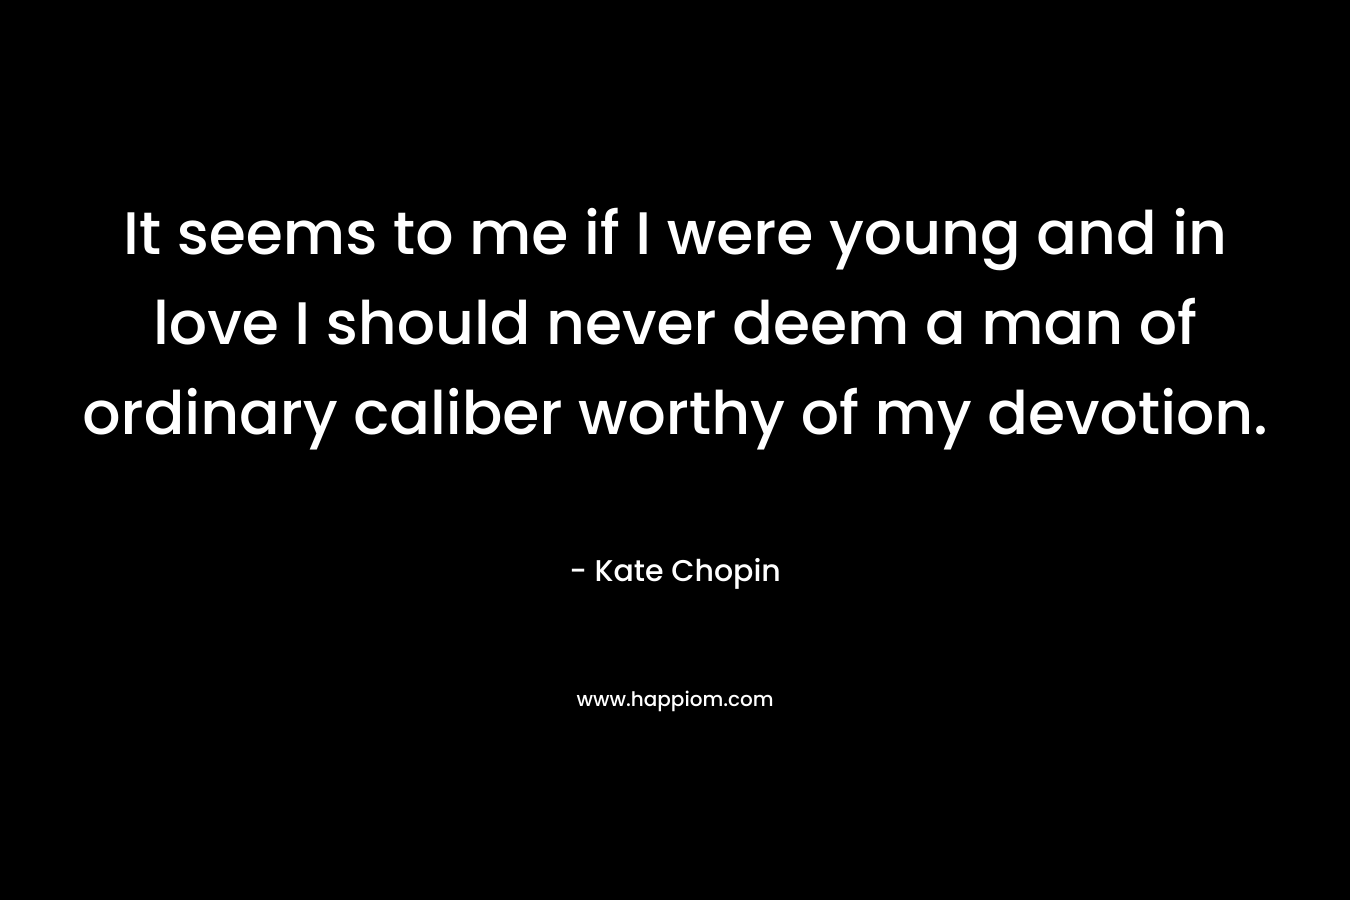 It seems to me if I were young and in love I should never deem a man of ordinary caliber worthy of my devotion. – Kate Chopin